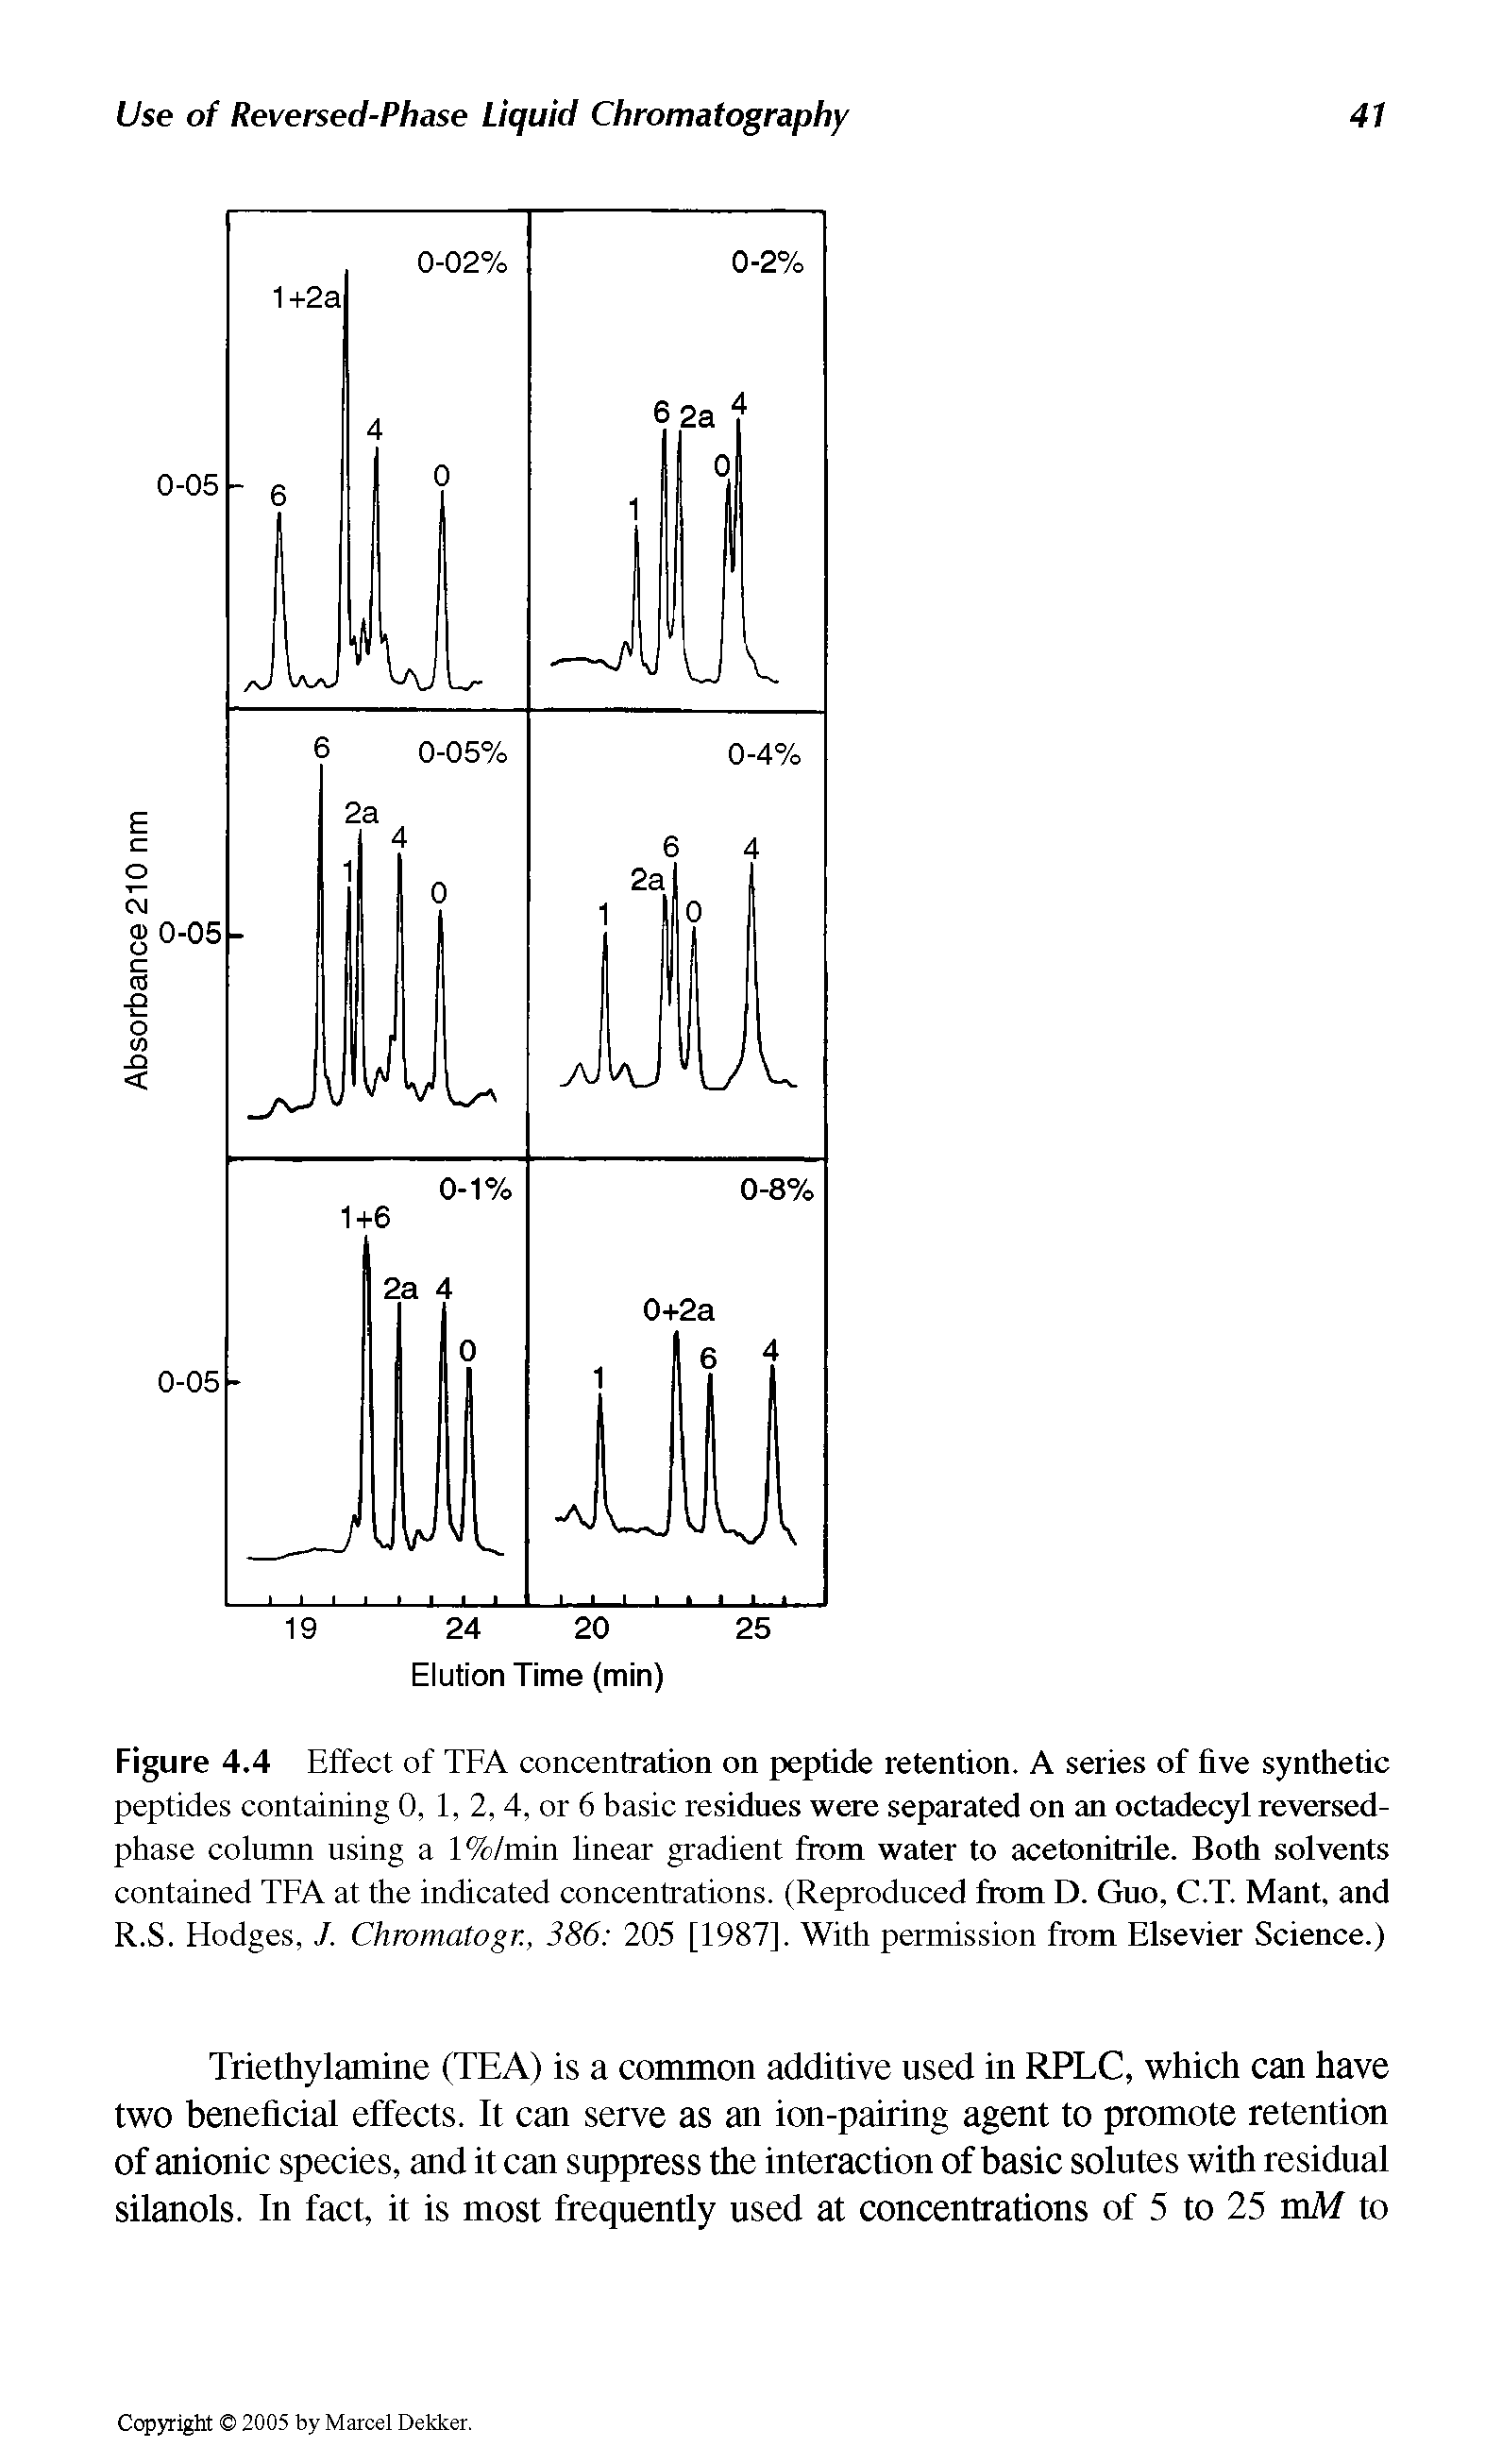 Figure 4.4 Effect of TFA concentration on peptide retention. A series of five synthetic peptides containing 0, 1,2, 4, or 6 basic residues were separated on an octadecyl reversed-phase column using a 1%/min linear gradient from water to acetonitrile. Both solvents contained TFA at the indicated concentrations. (Reproduced from D. Guo, C.T. Mant, and R.S. Hodges, J. Chromatogr., 386 205 [1987]. With permission from Elsevier Science.)...